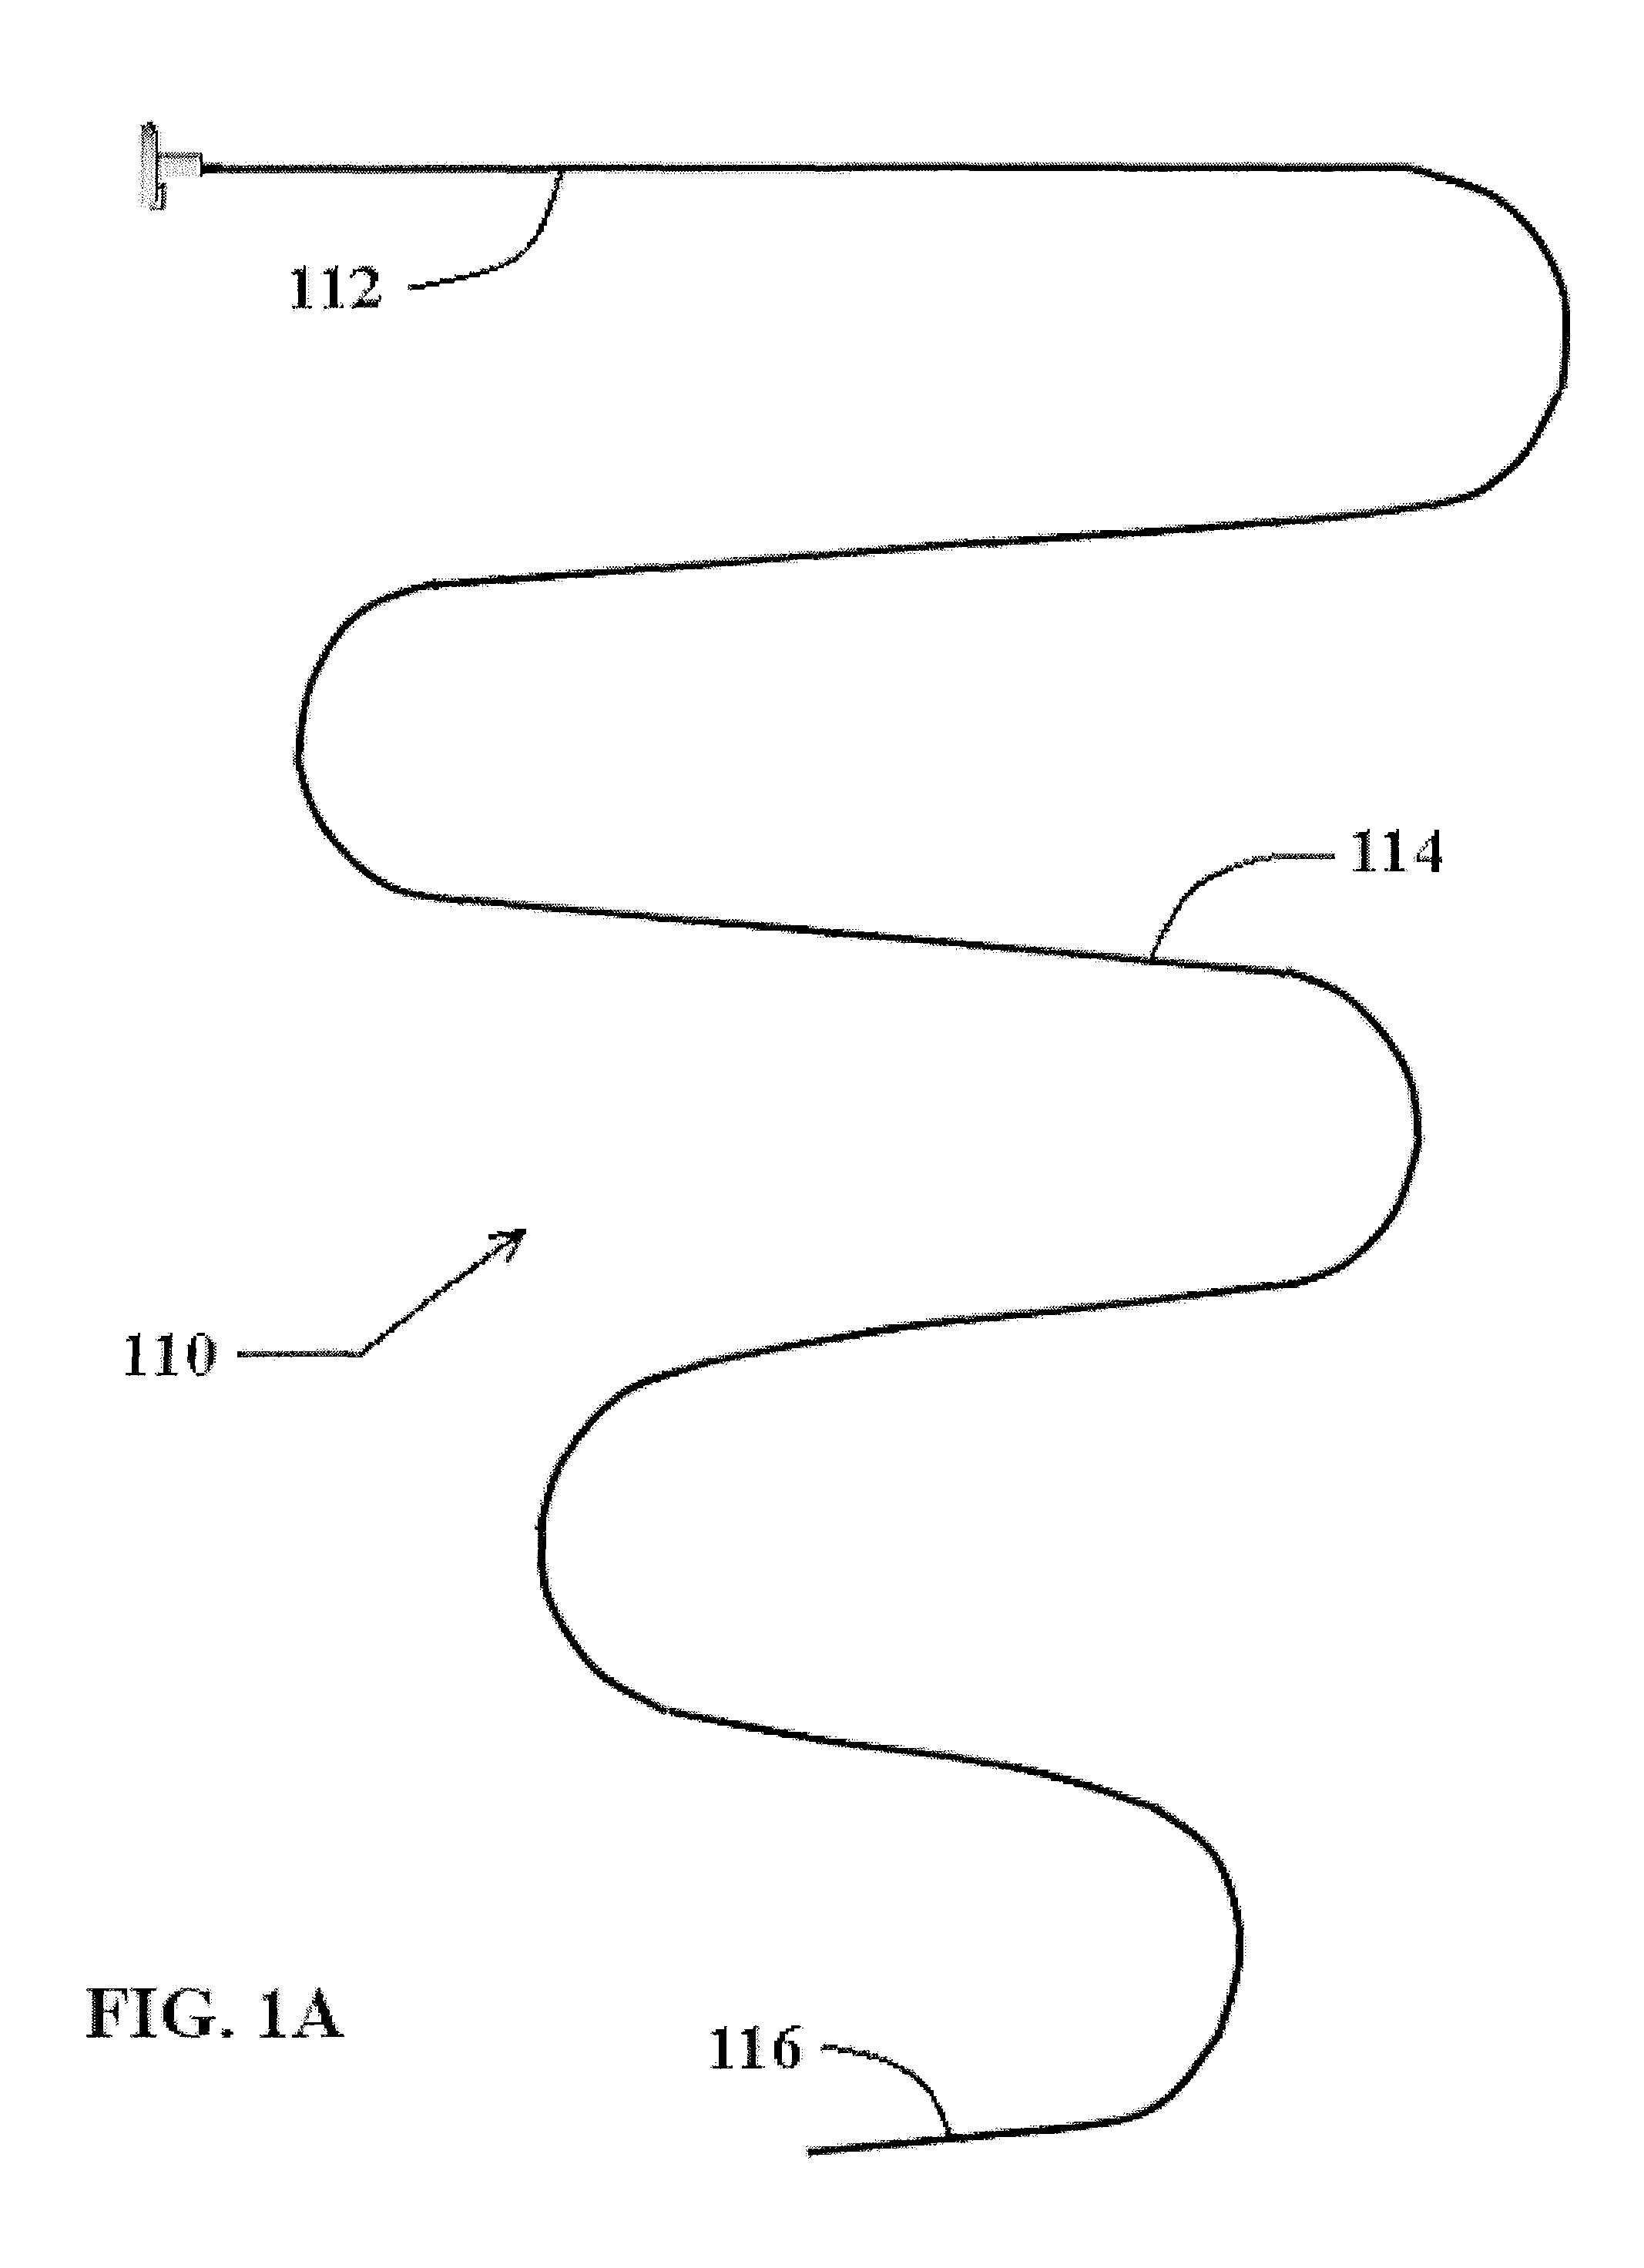 Self-coiling stylet needle device